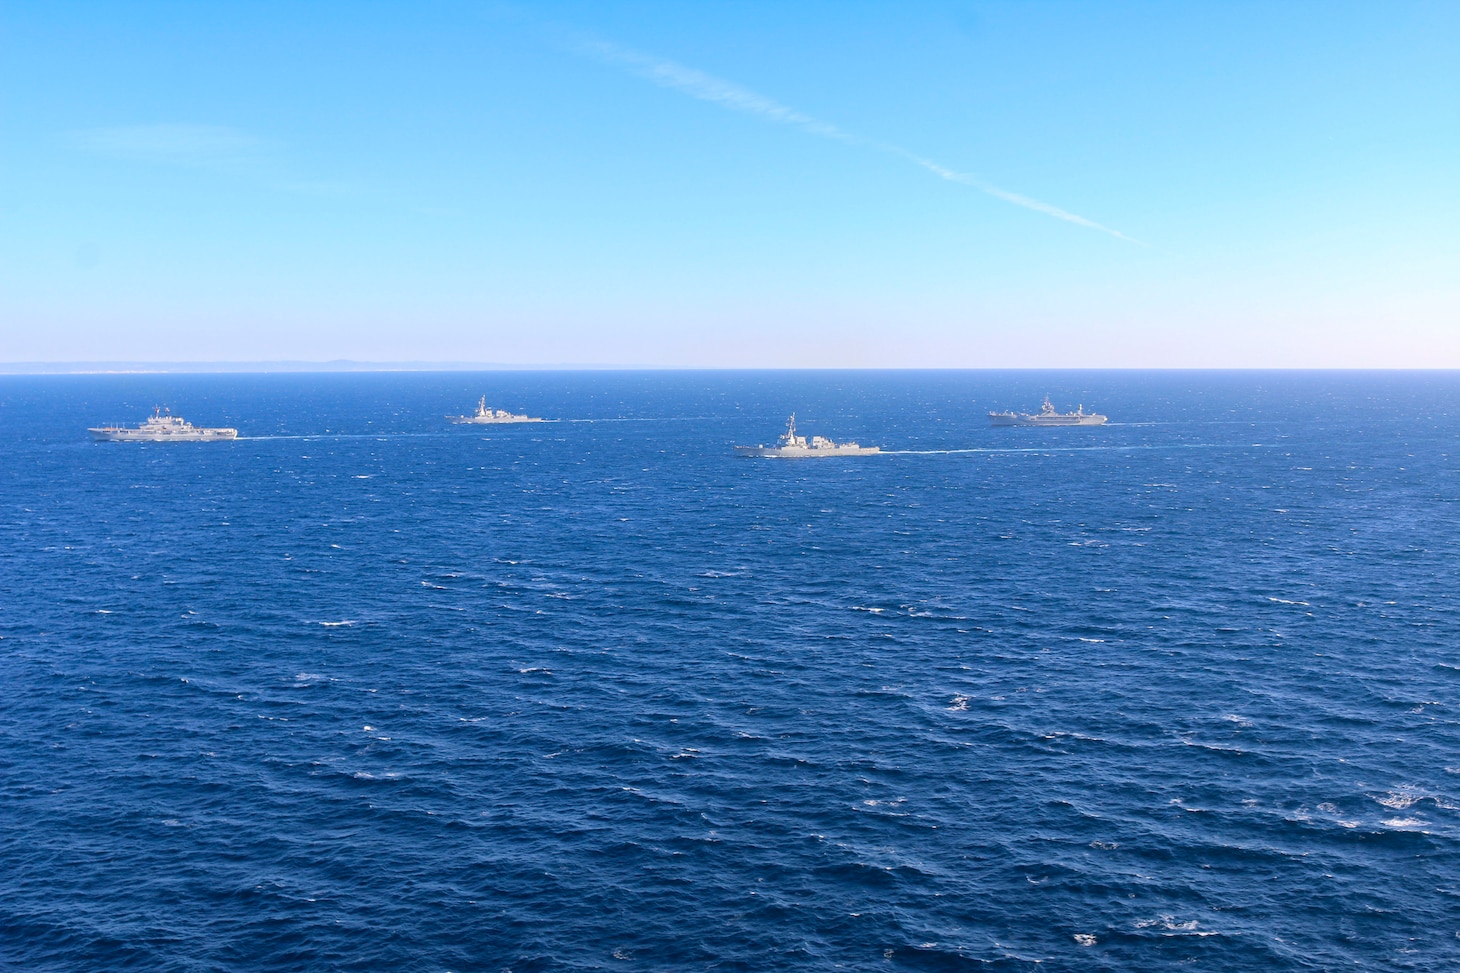 The Italian aircraft carrier ITS Giuseppe Garibaldi (C 551) sails in formation with Blue ridge-class amphibious command ship USS Mount Whitney (LCC 20) and the guided-missile destroyers USS Roosevelt (DDG 80) and USS Forrest Sherman (DDG 98), Feb 22.